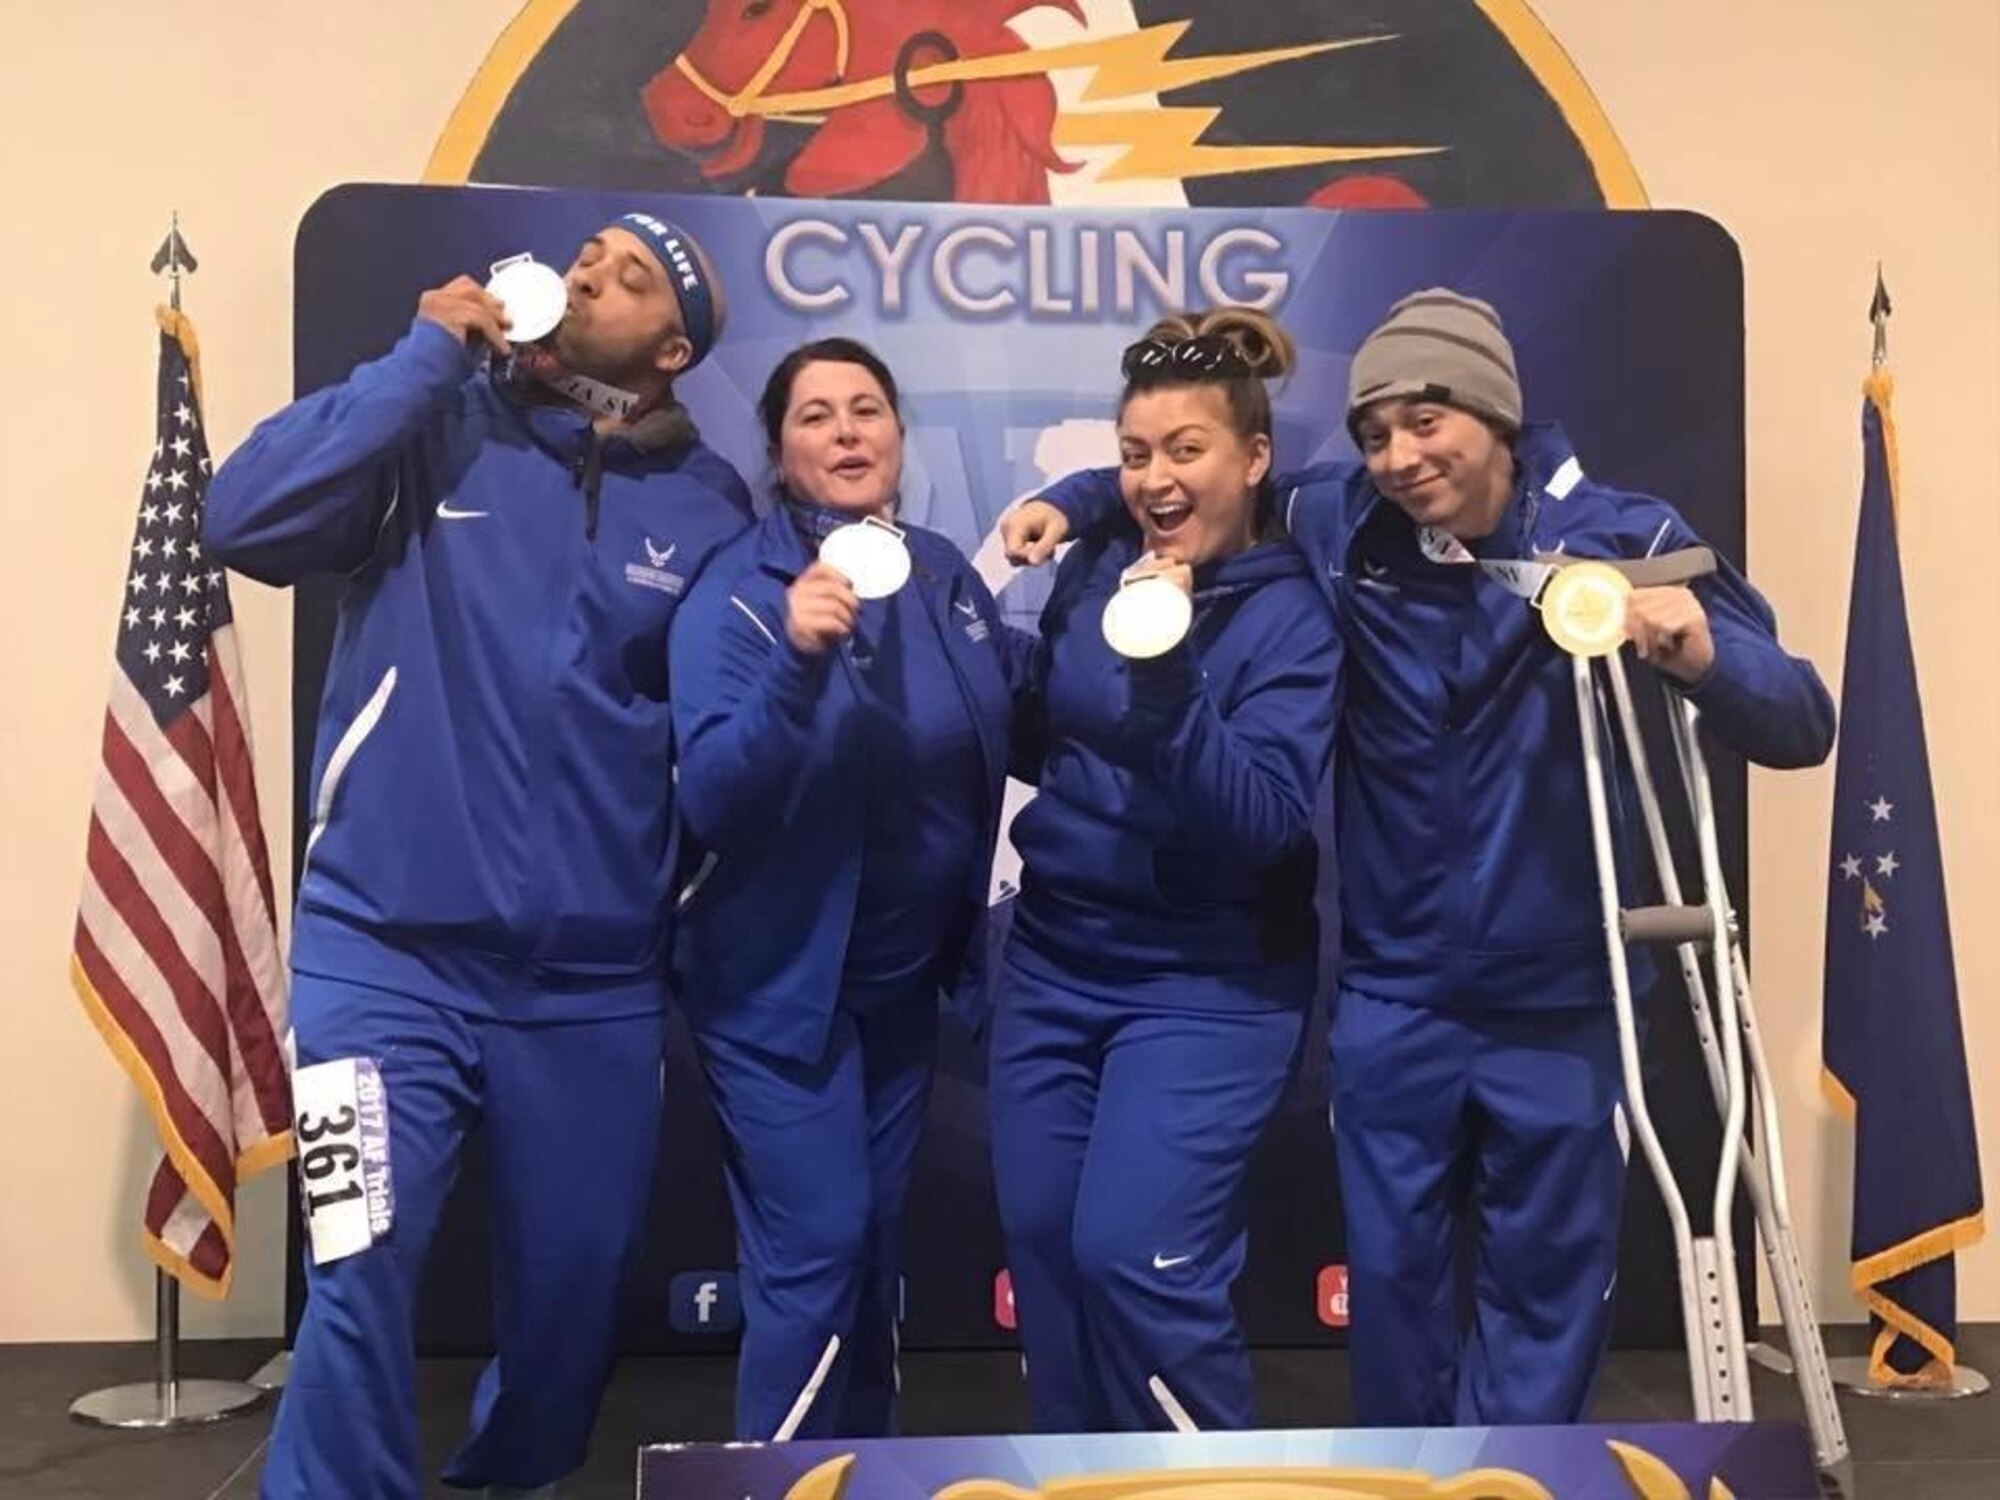 Tech. Sgt. Terrance Williams, the 22nd Security Forces Squadron resources NCO in charge, and his teammates pose for a photo during the Air Force Wounded Warrior Trials in February 2017, at Nellis Air Force Base, Nev. After competing in wheelchair basketball, sitting volleyball, cycling and track, Williams was chosen to advance to the Defense Department Warrior Games, which will be held June 30 to July 9, 2017. (Courtesy photo)